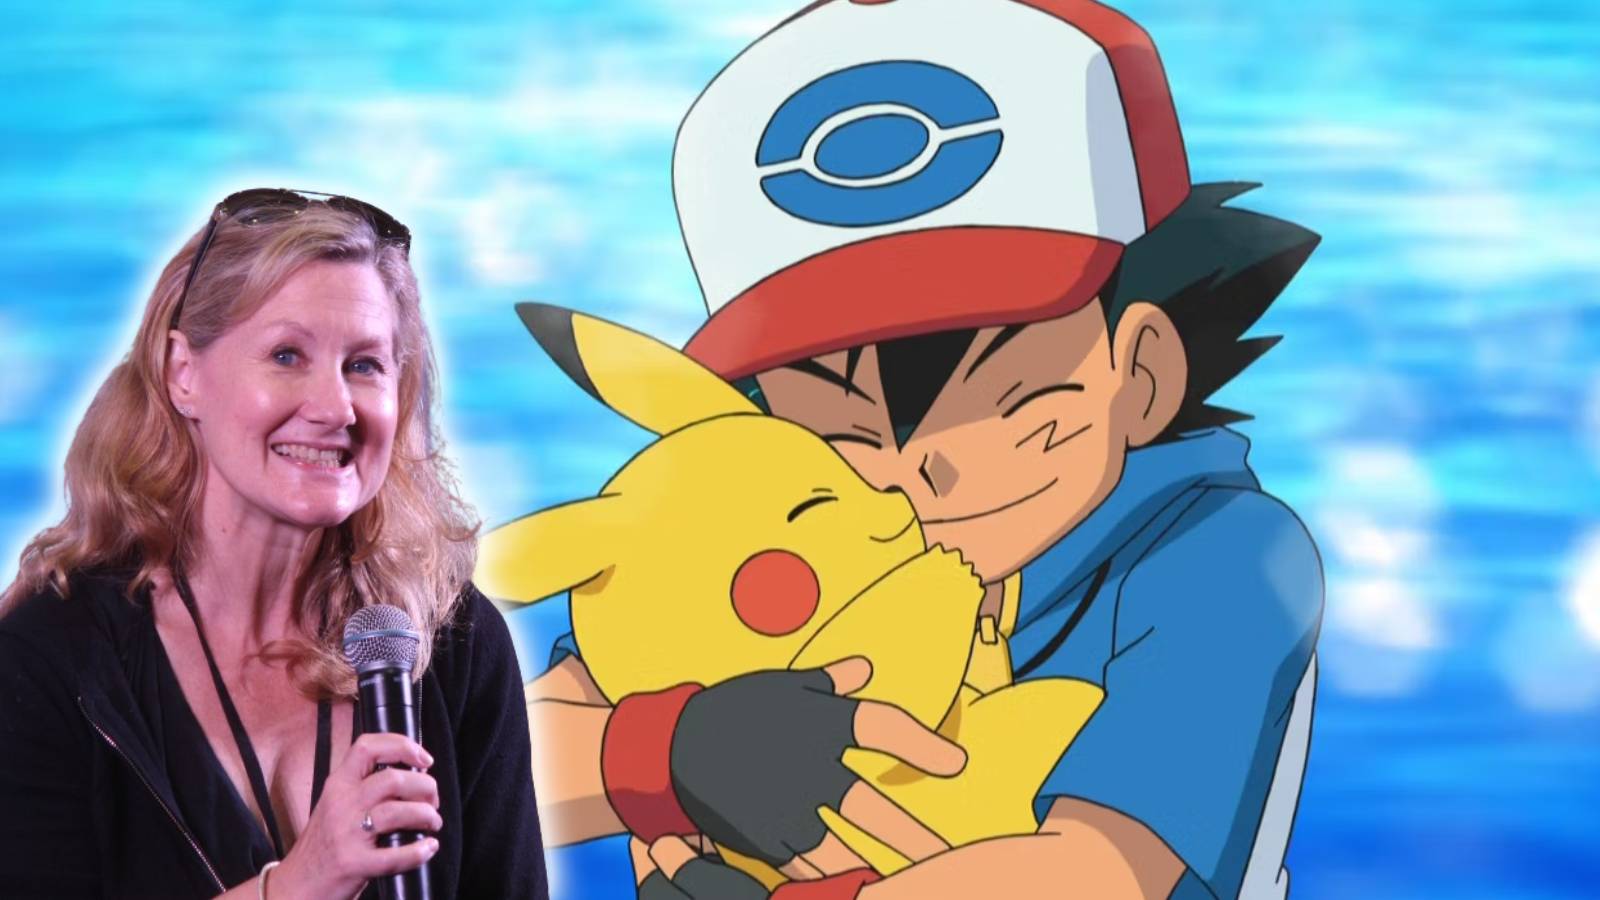 An image from the Pokemon anime shows Ash ketchum hugging pikachu, while on the left hand side, a head shot for voice actor Veronica Taylor is visible